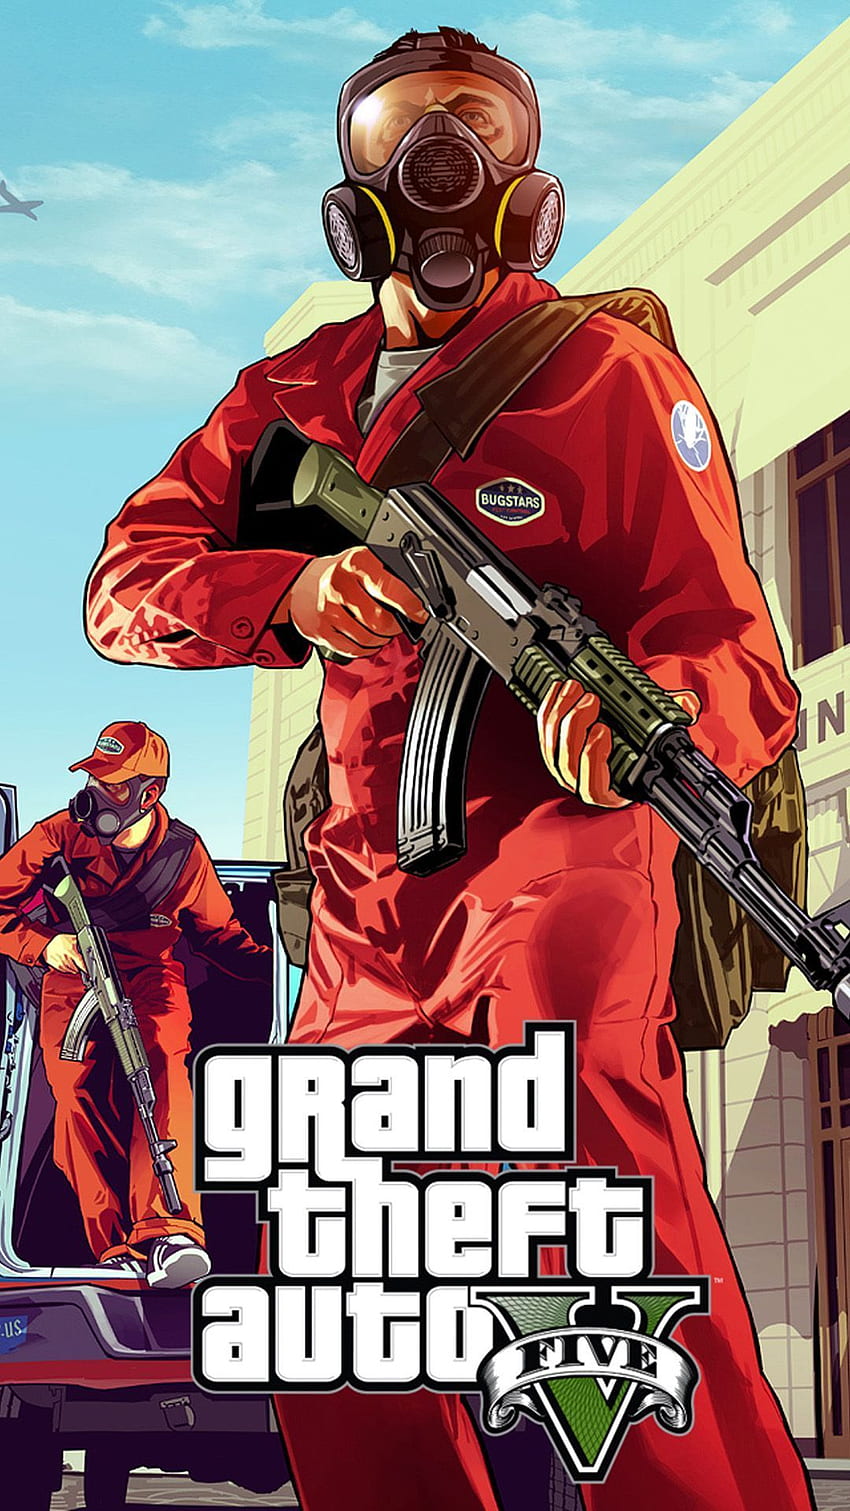 Trevor Gta V Android Is Best on fo, if you like it. HD phone wallpaper